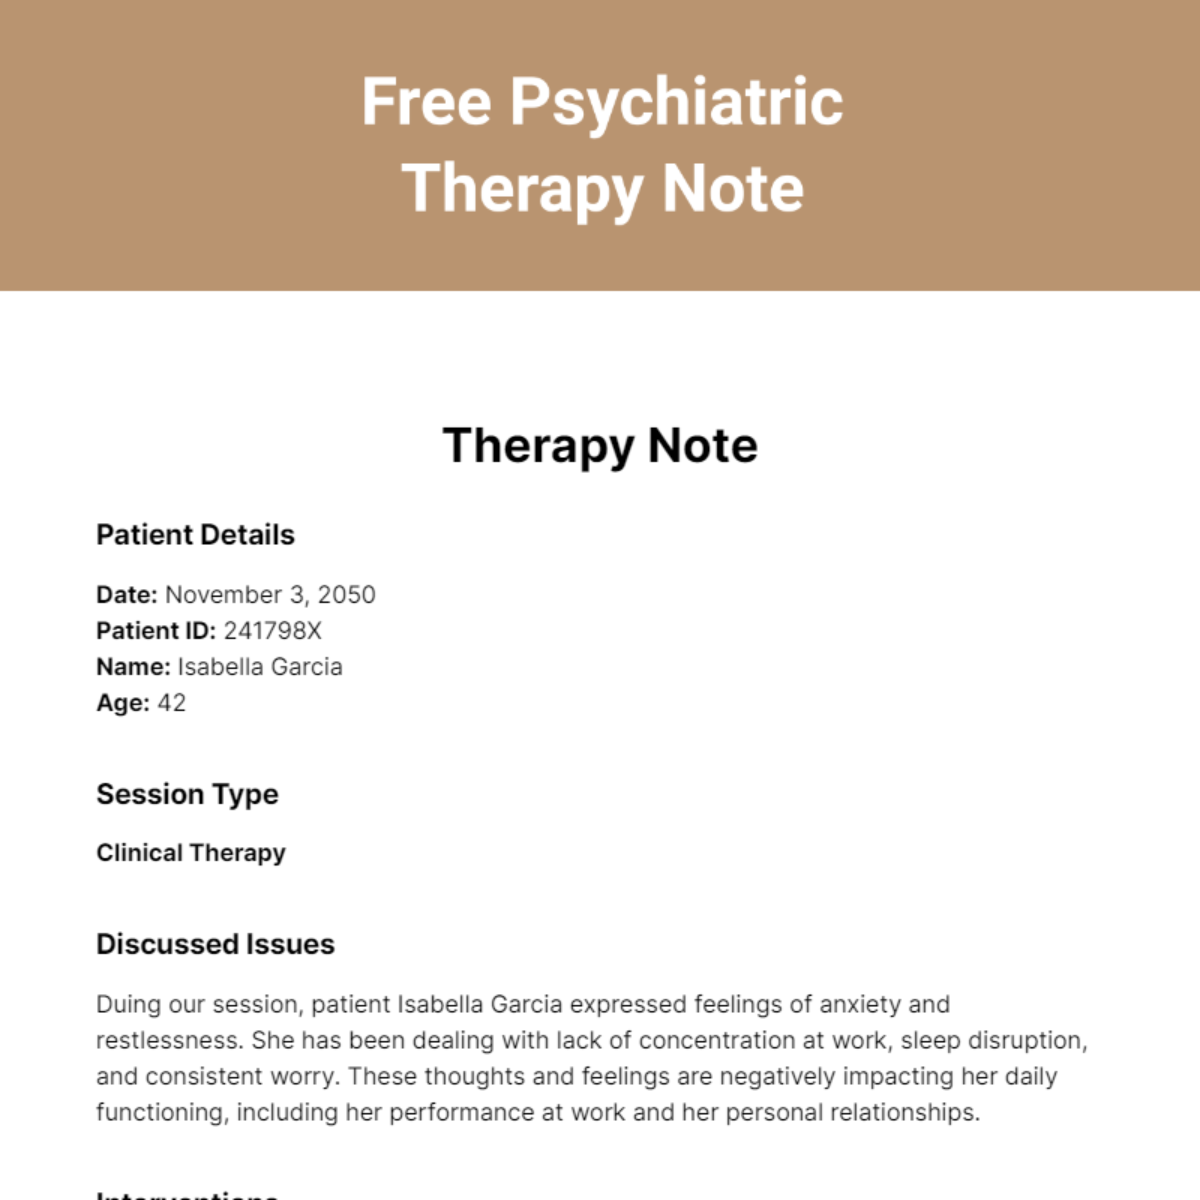 Free Psychiatric Therapy Note Template